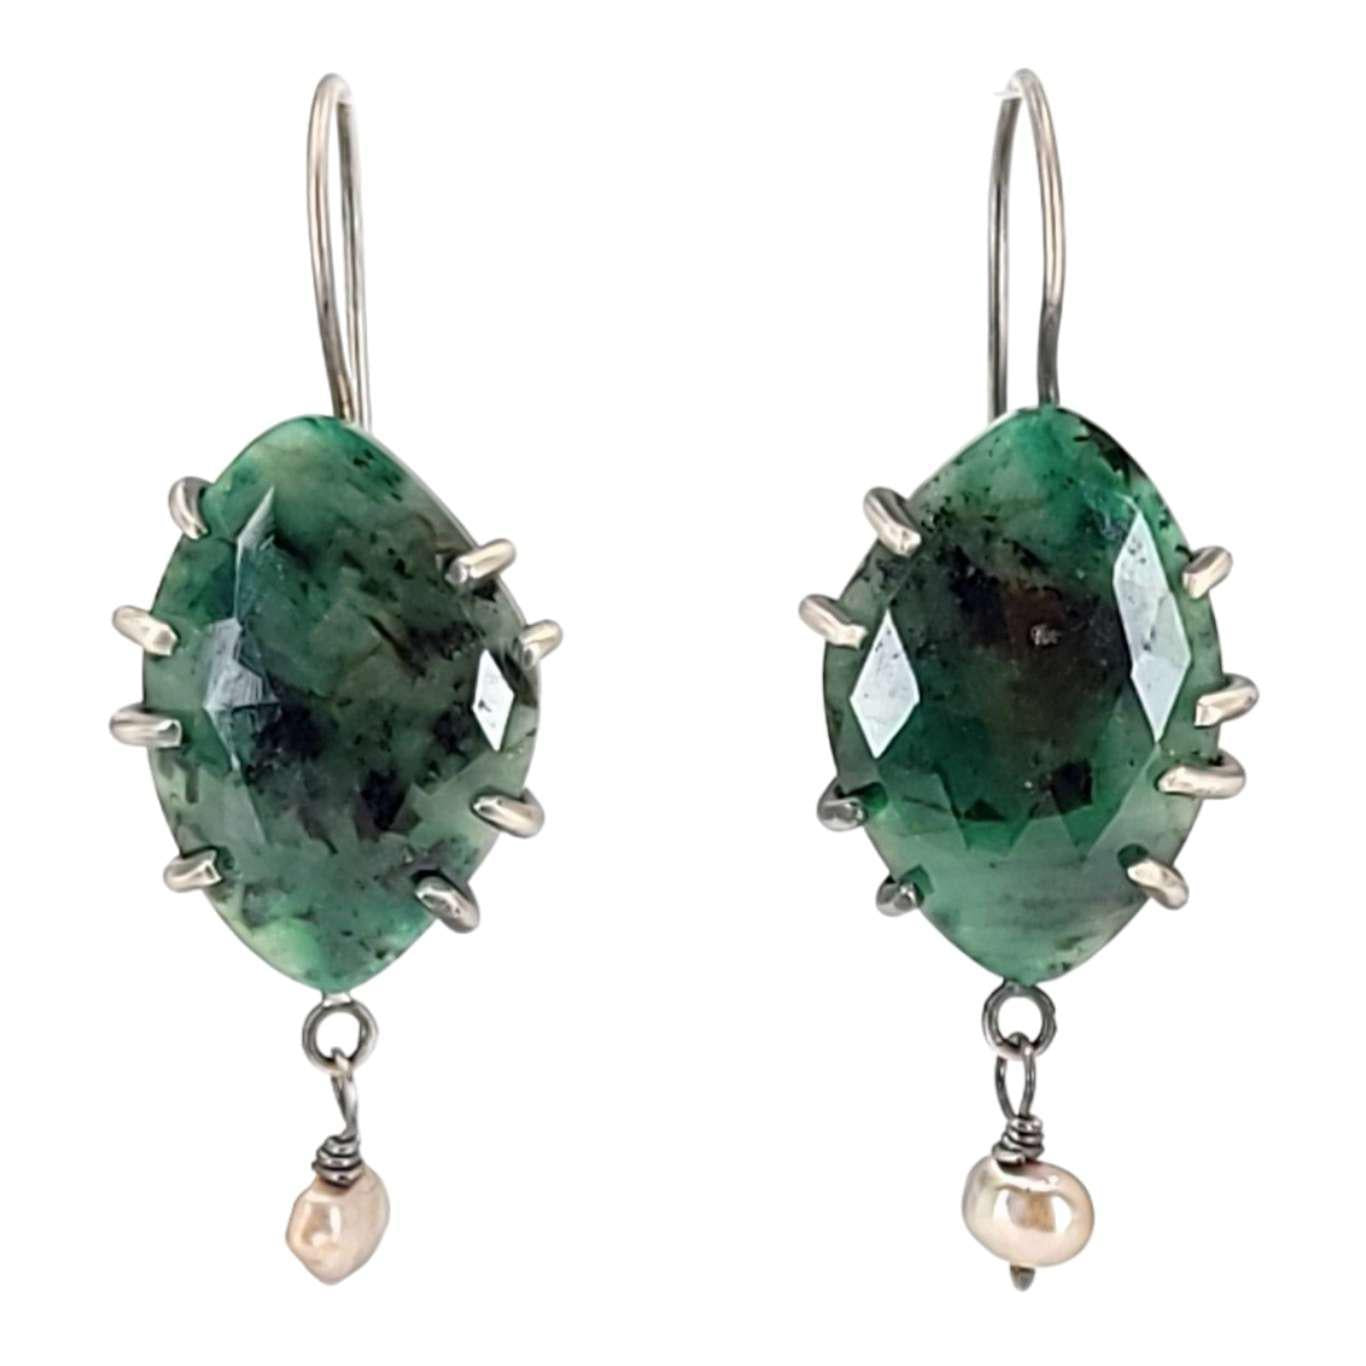 Earrings - Large Emerald with Pearl Drop in Oxidized Sterling Silver by Three Flames Silverworks